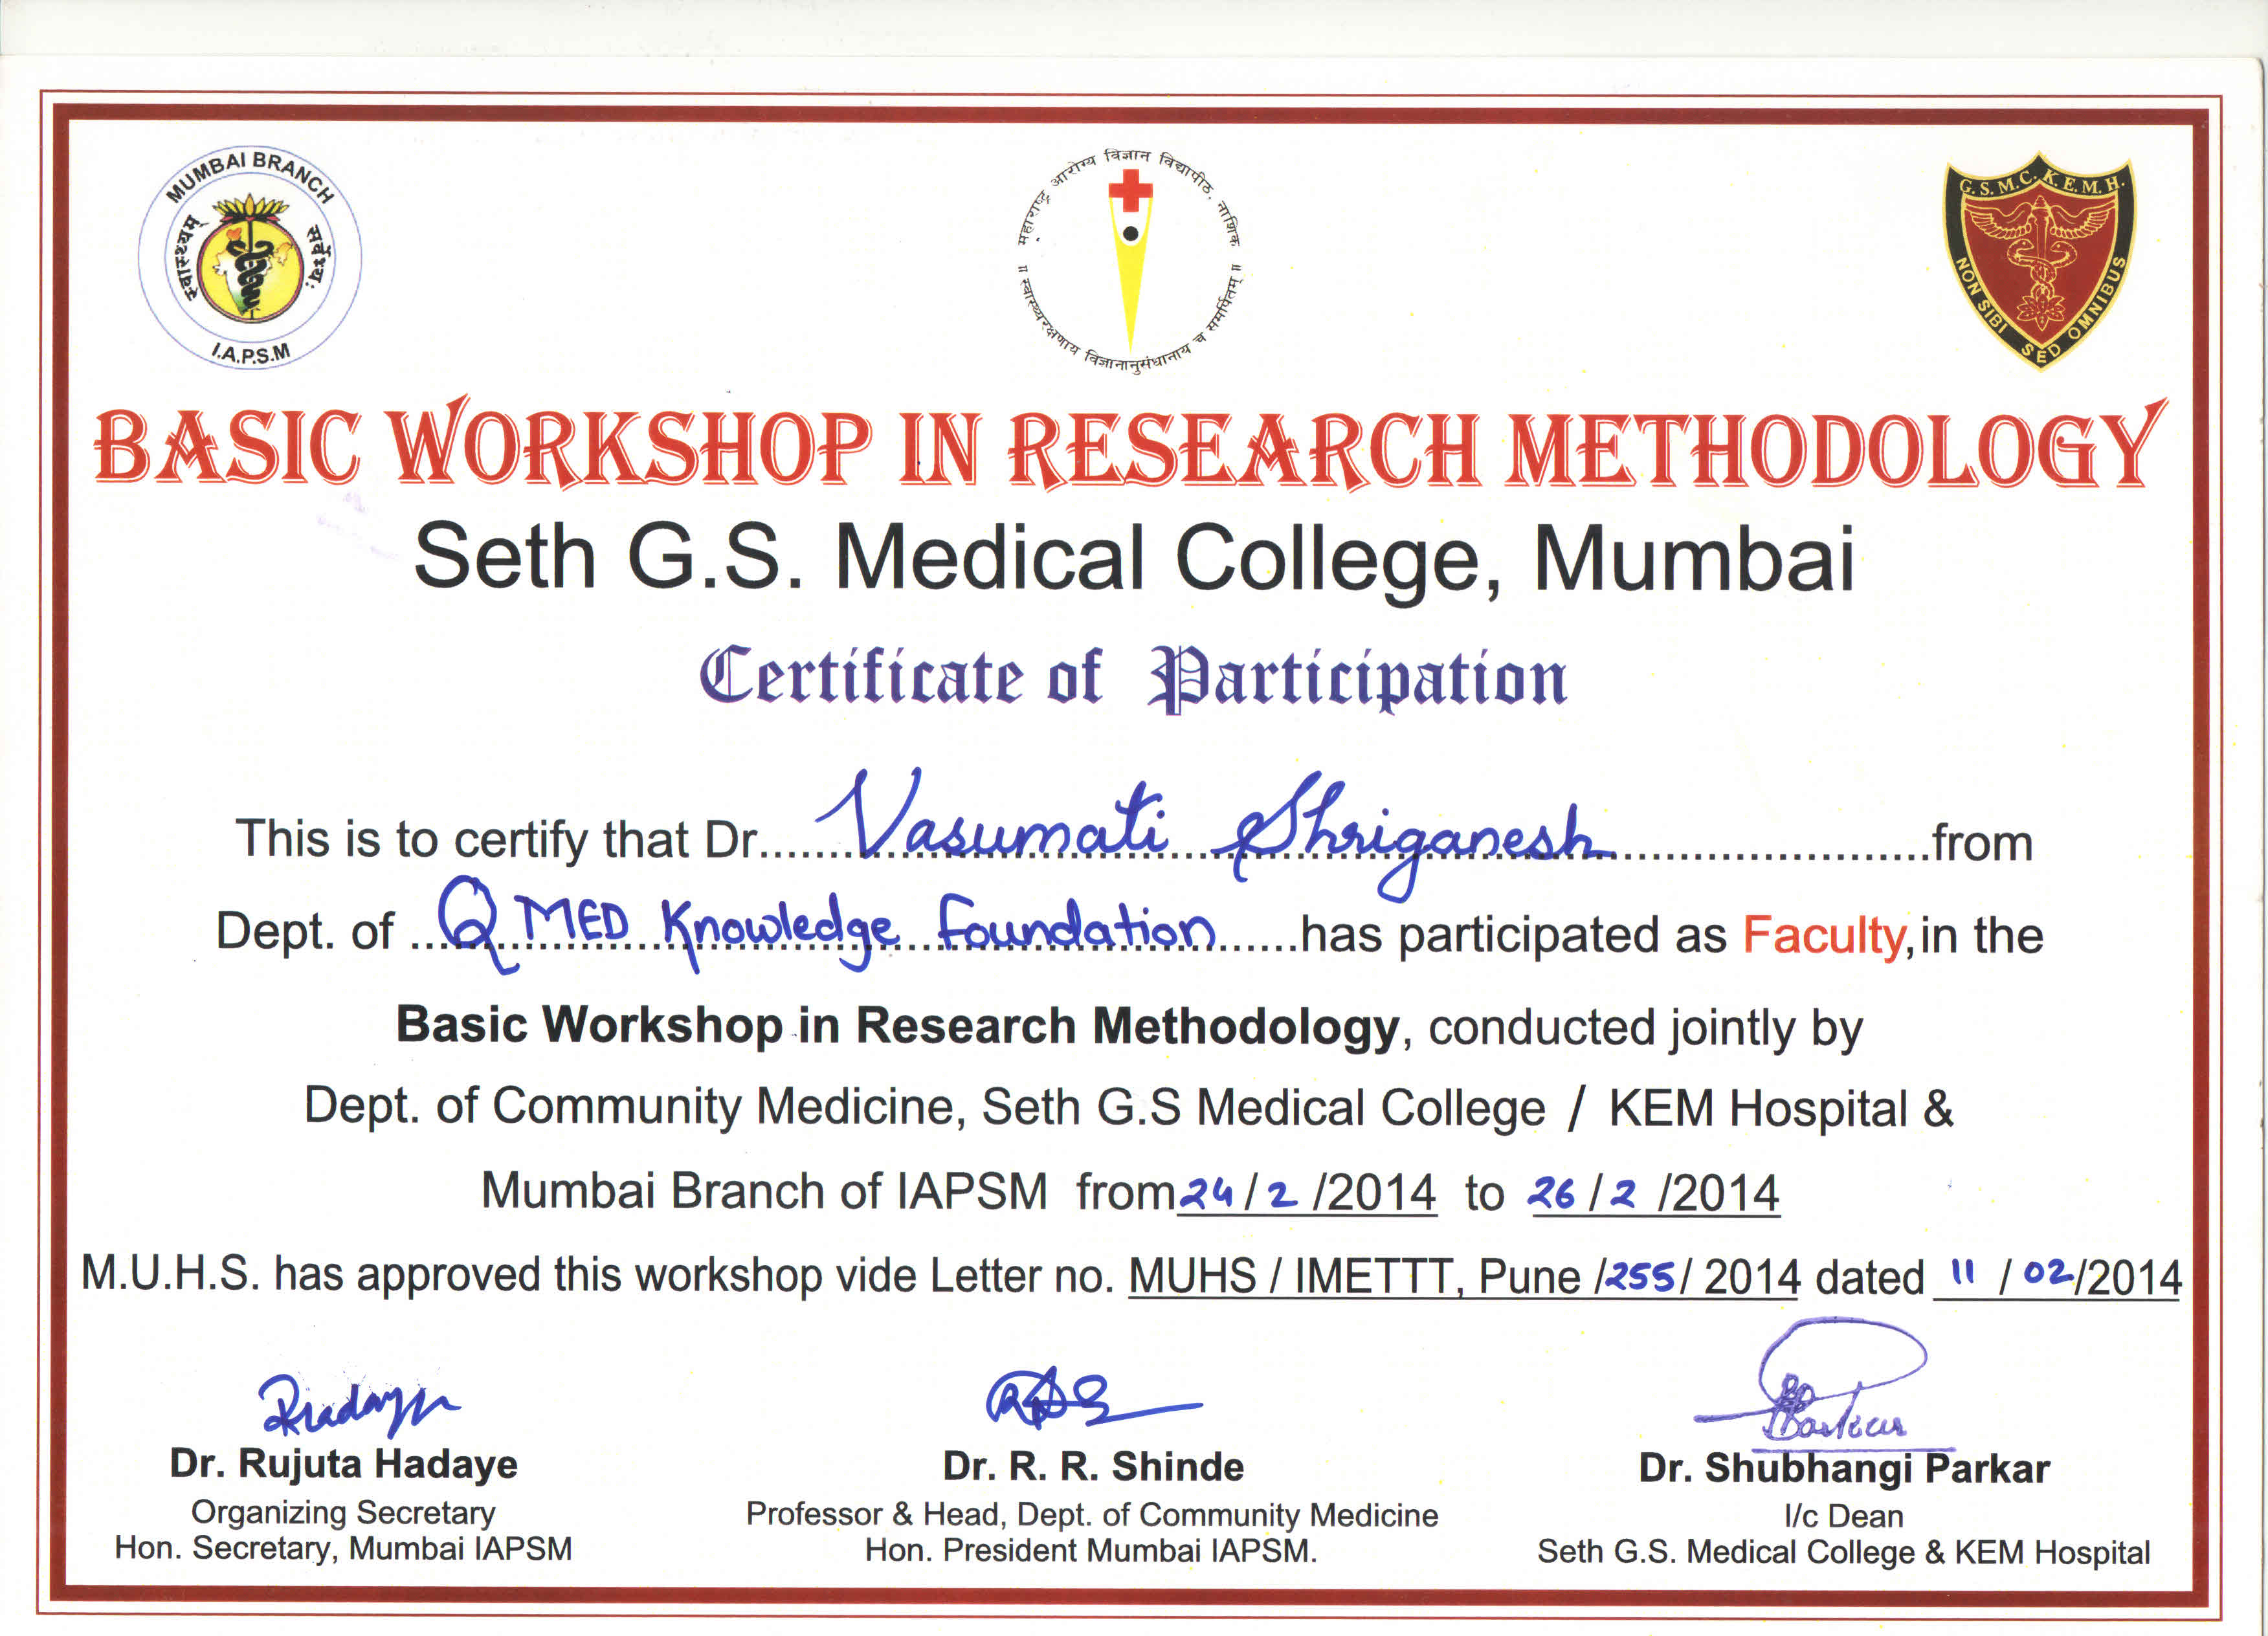 Seth GS Medical College and KEM Hospital-Lecture